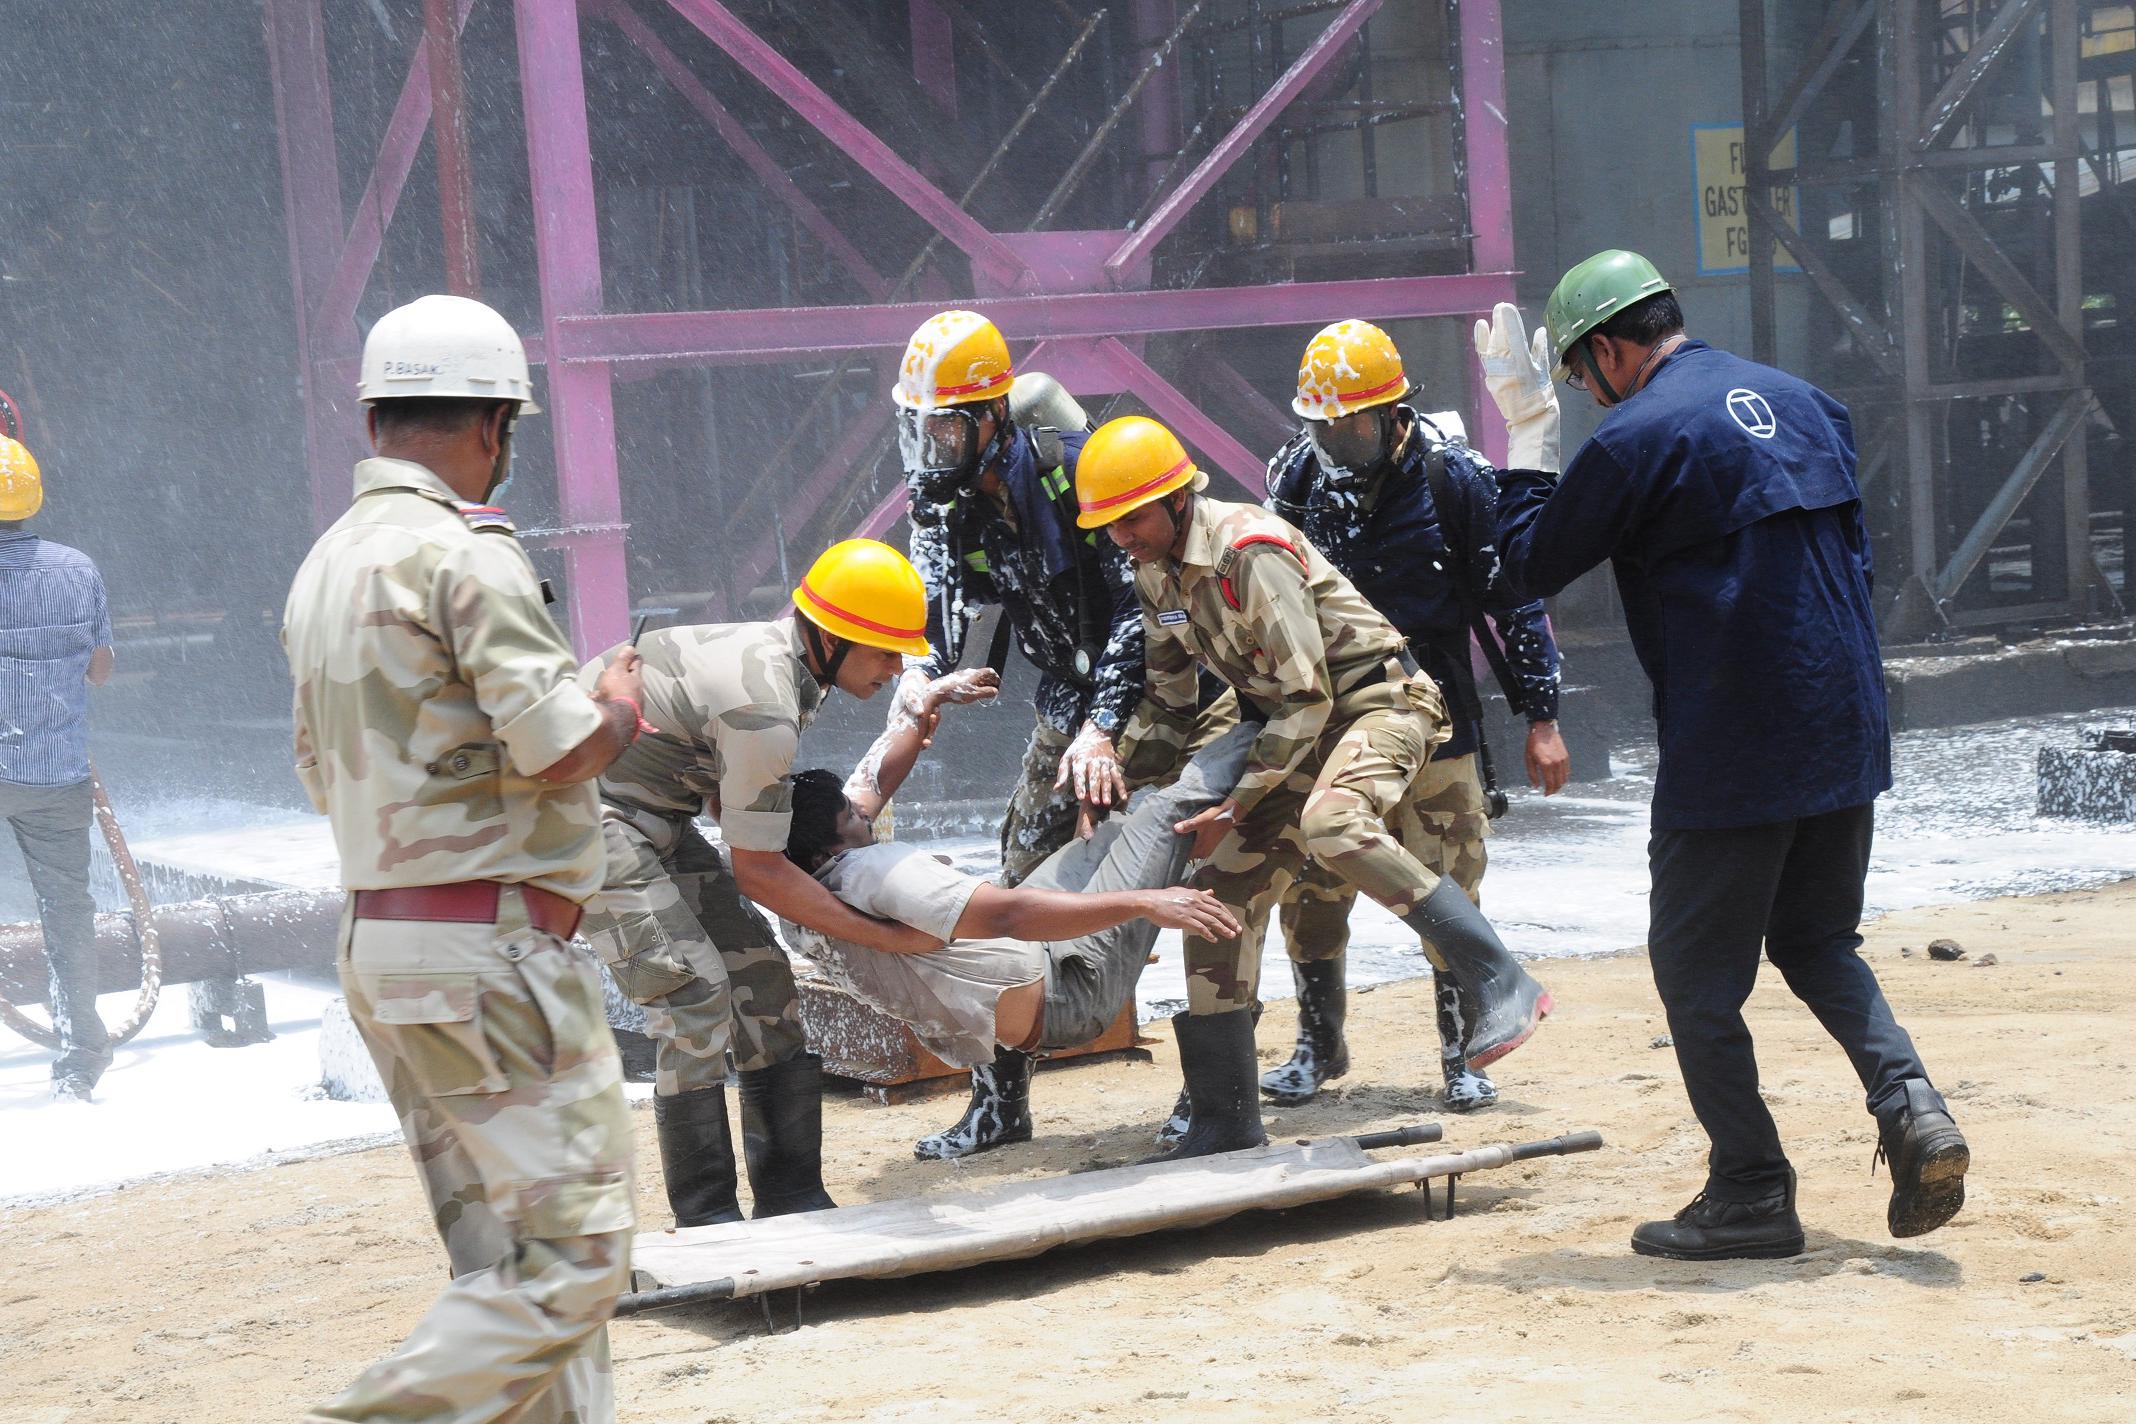 RINL conducts mock drill as part of onsite Emergency Preparedness